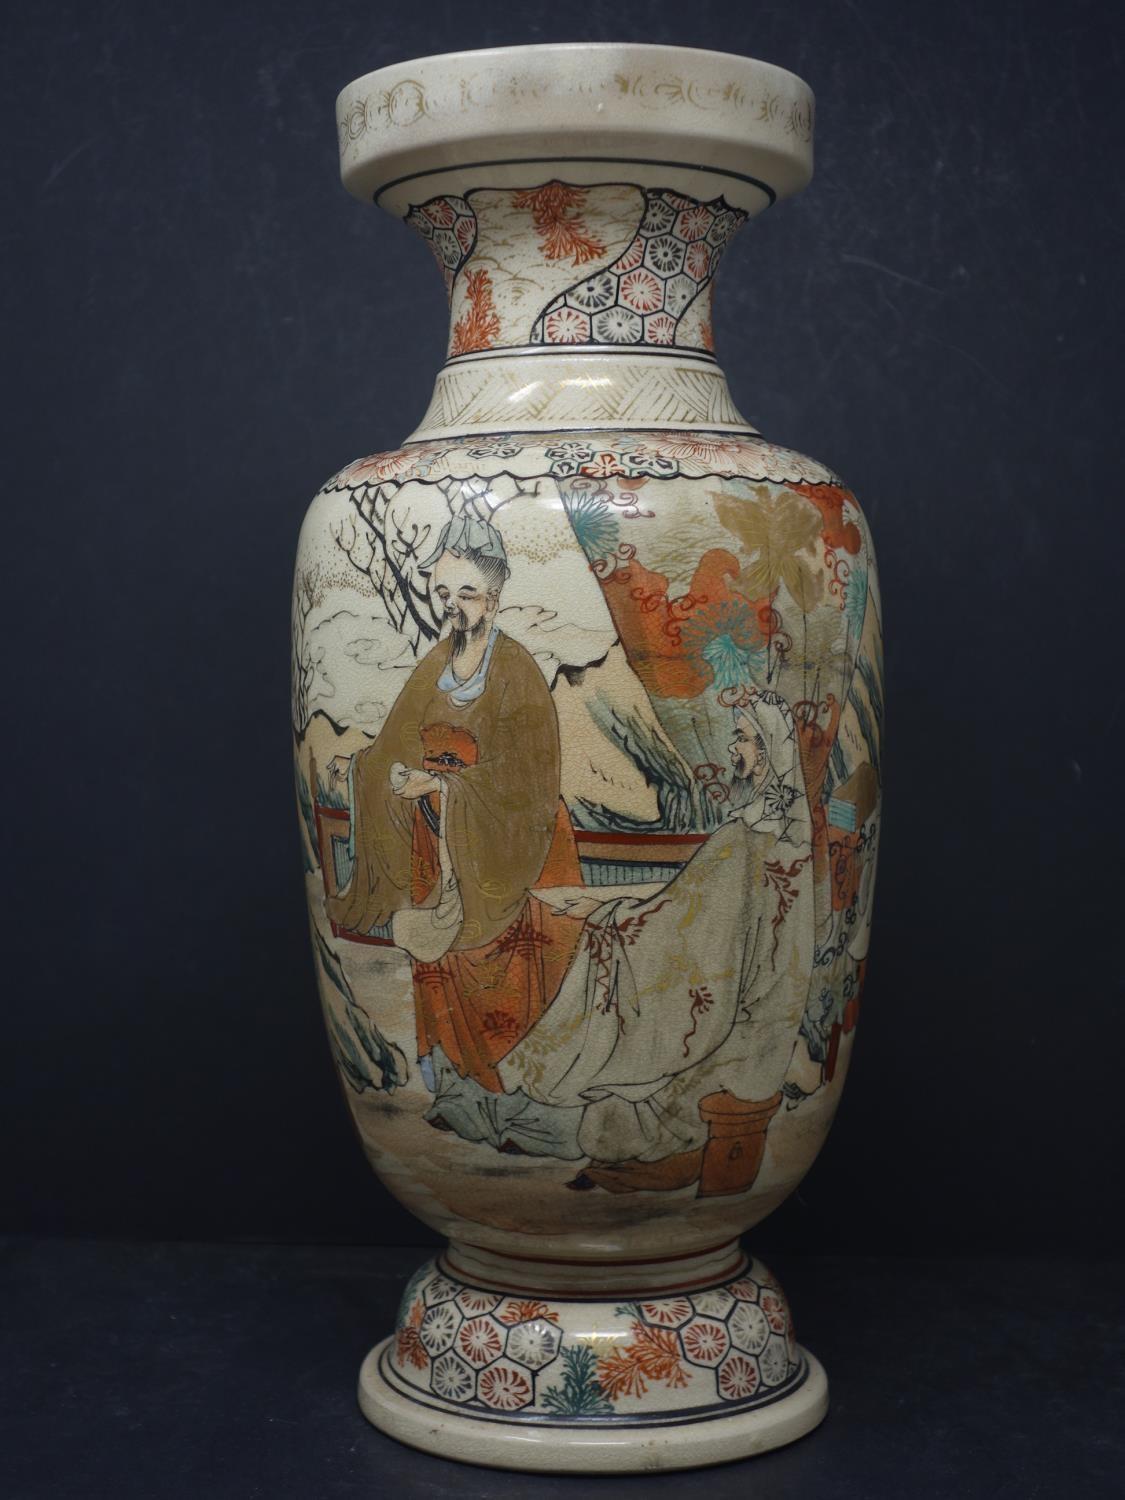 An early 20th century Japanese vase, decorated with a continuous procession of figures in a - Image 2 of 4